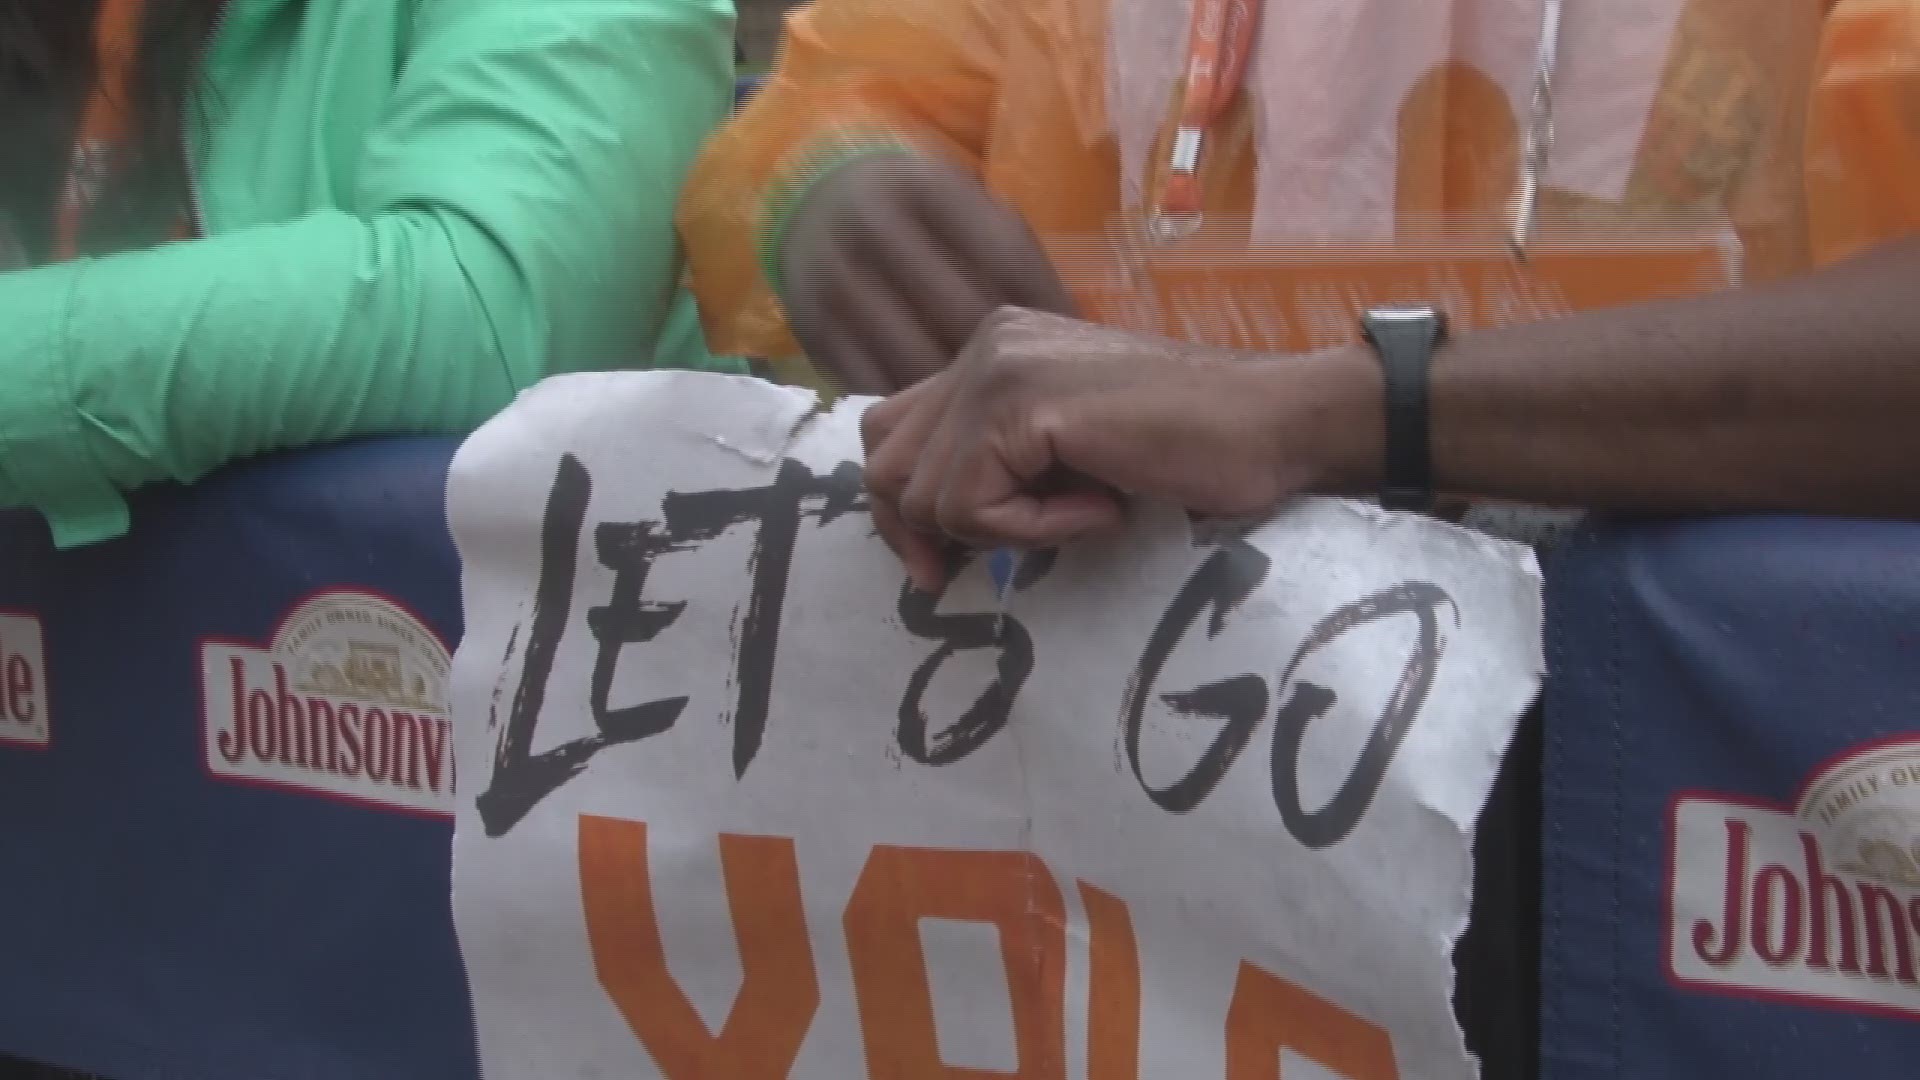 The Vols vs. Alabama football game has a long tradition.